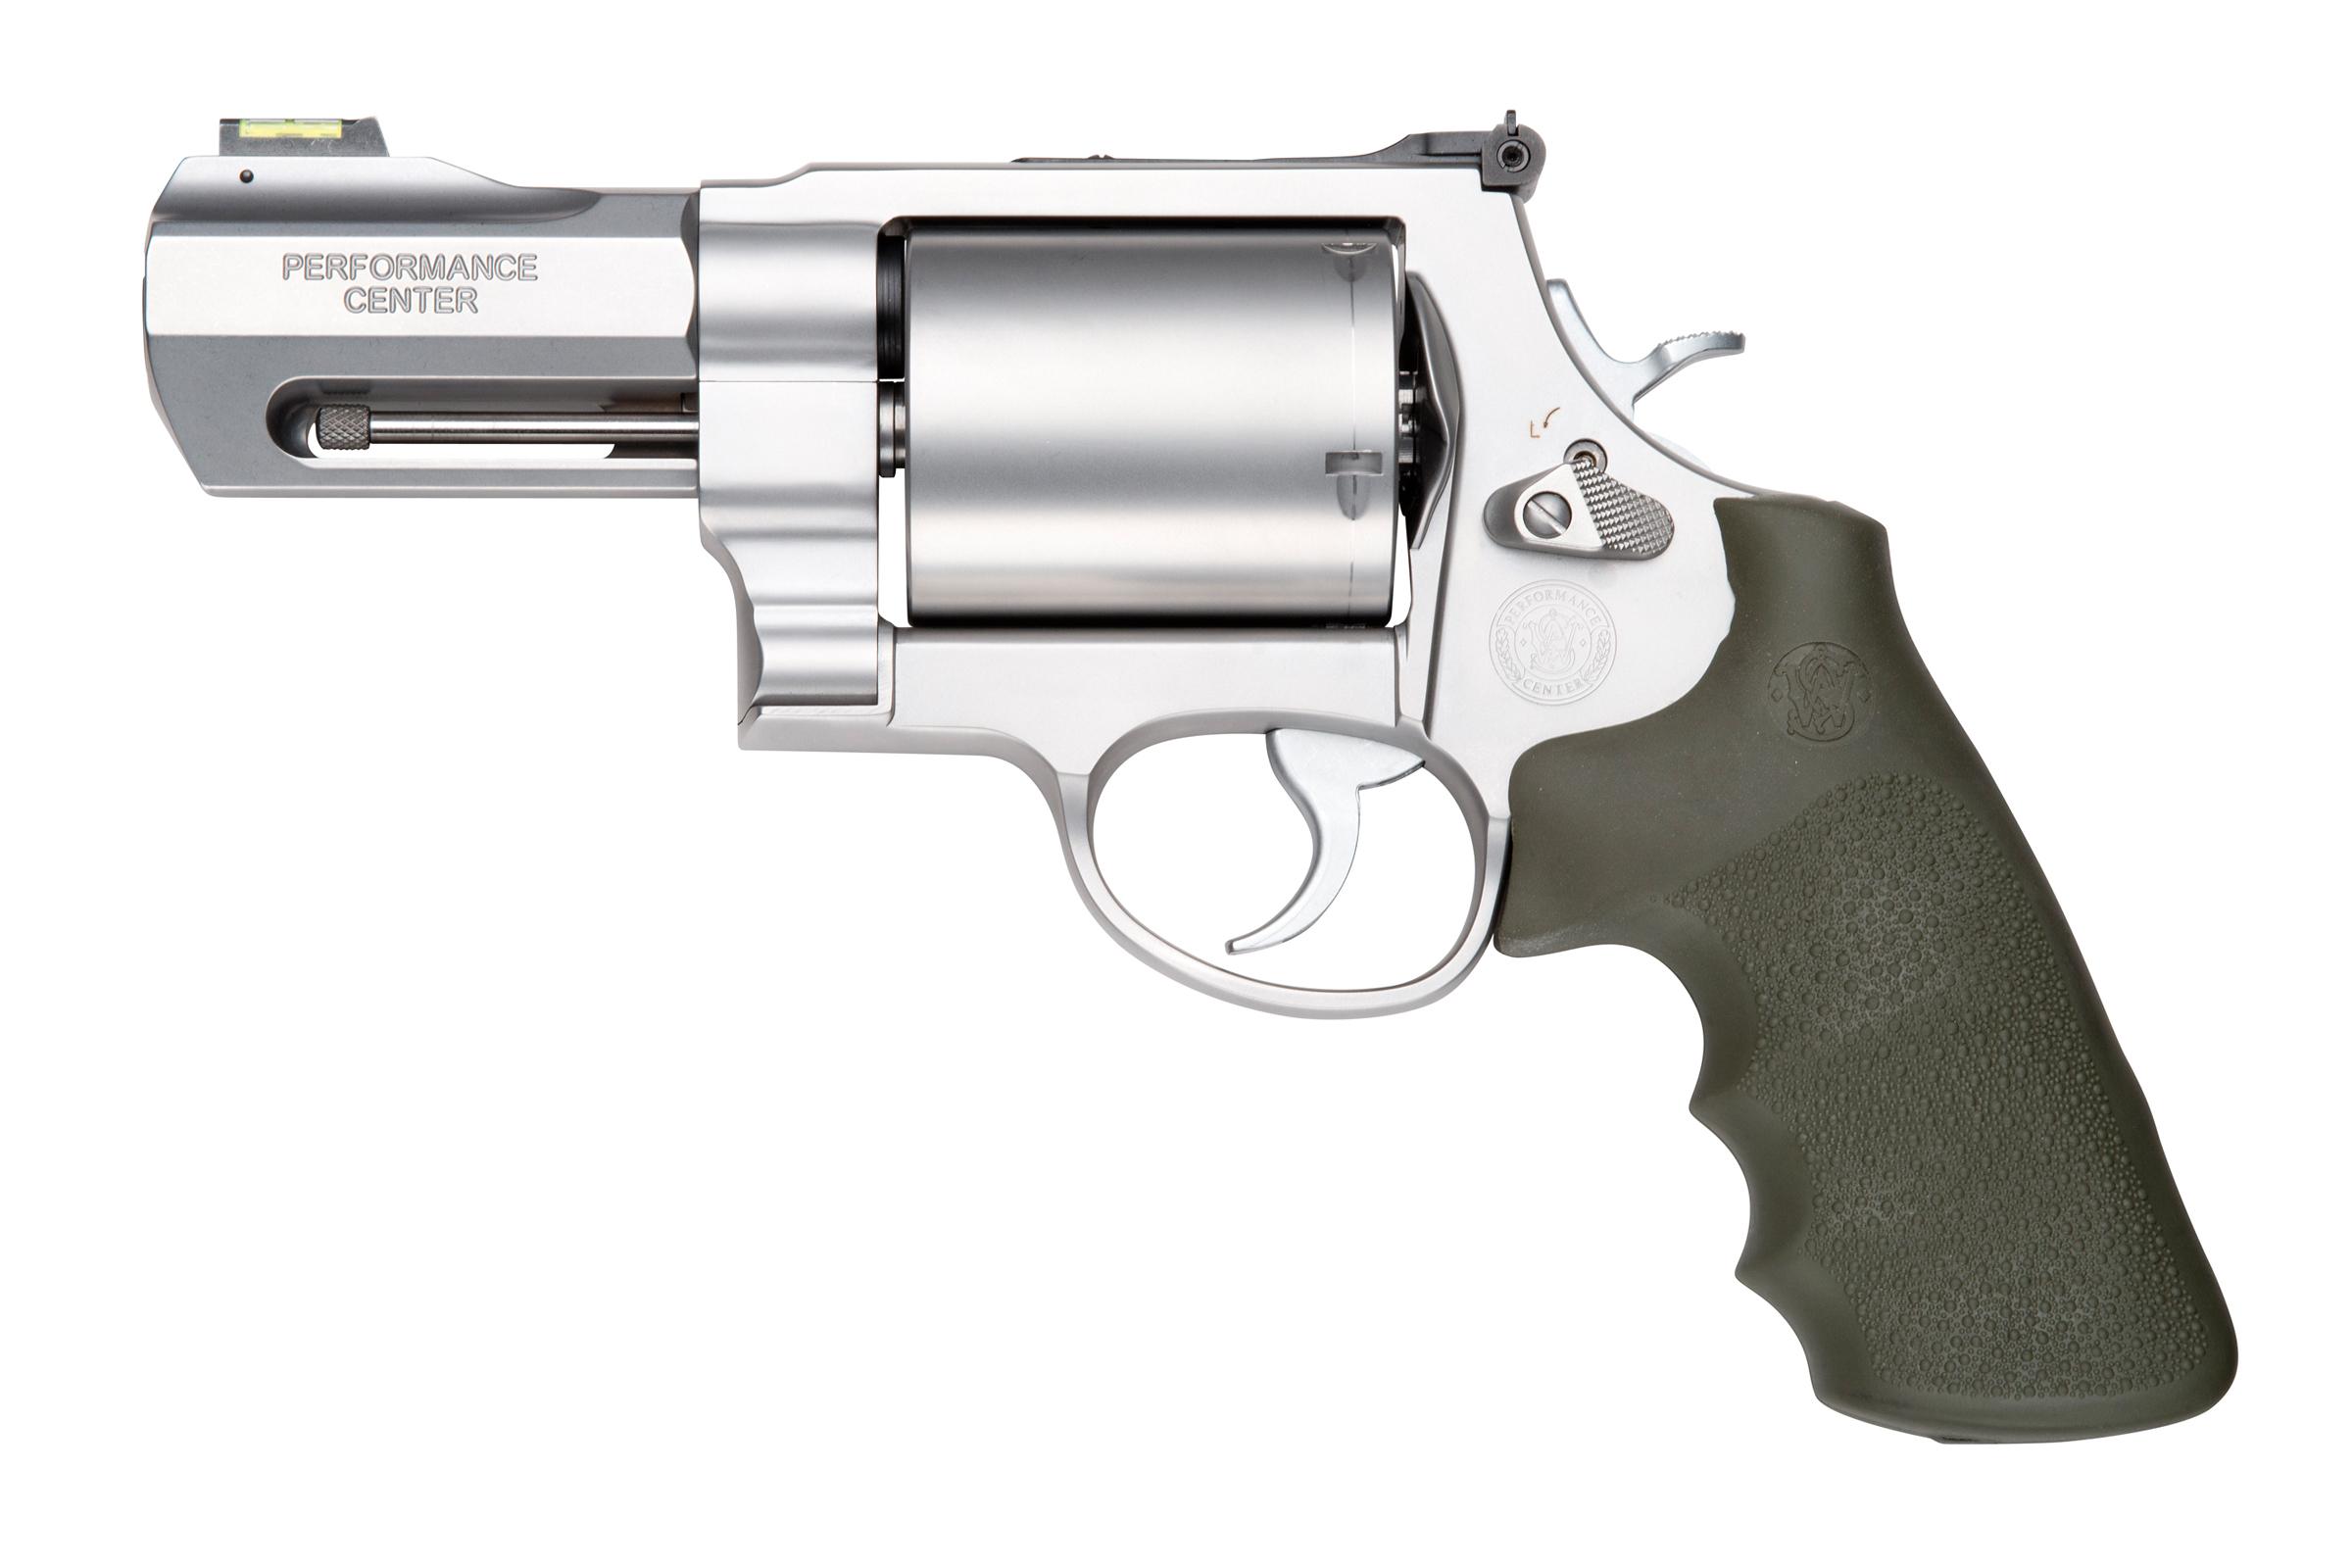  Smith & Wesson Performance Center 460 Xvr 3.5 